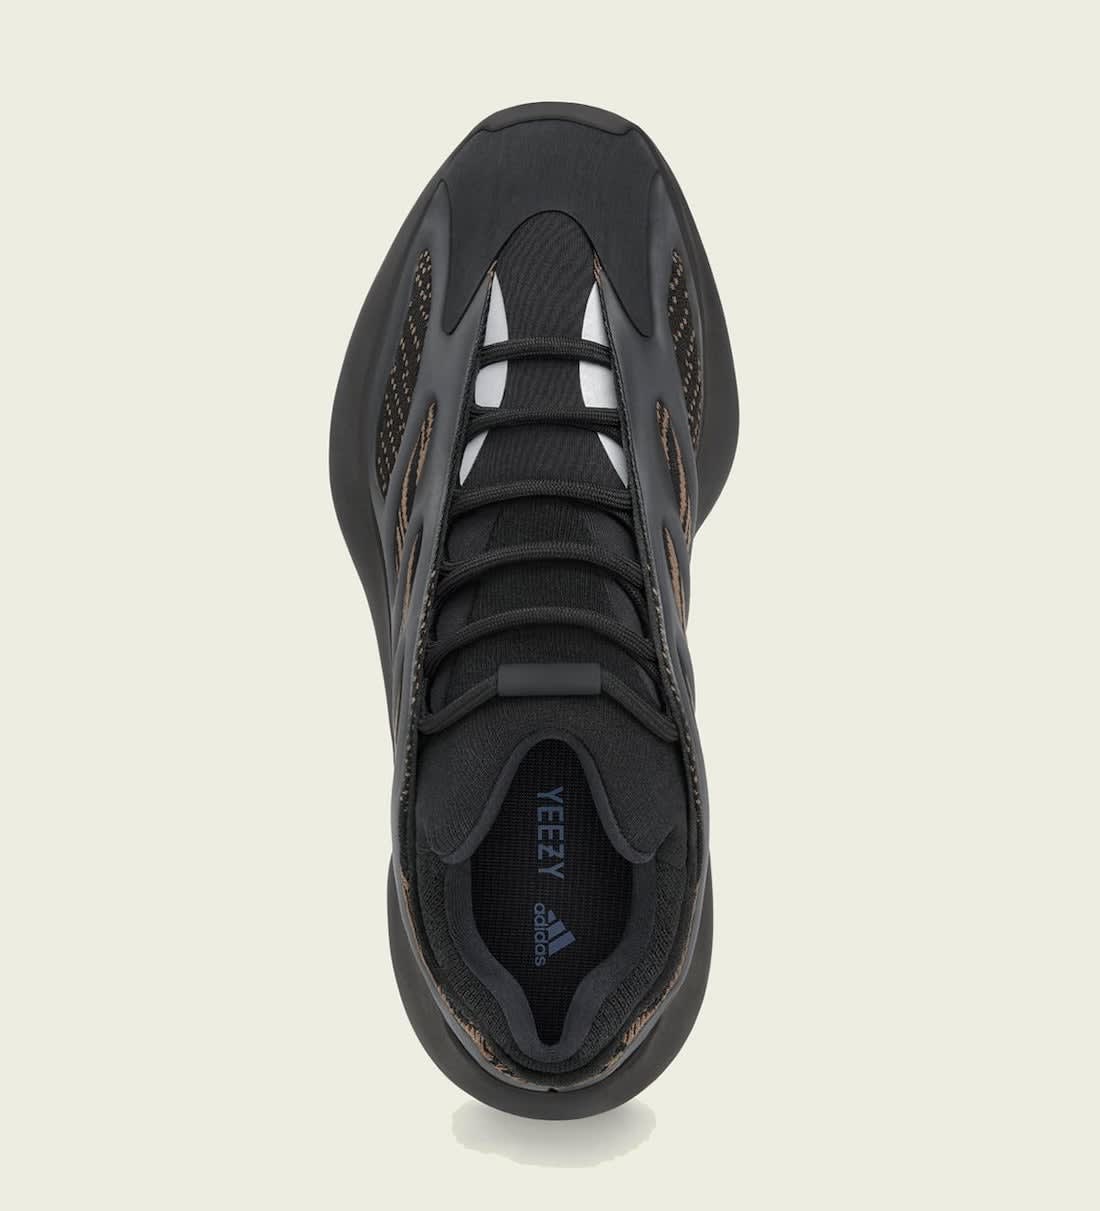 Adidas Yeezy 700 V3 Clay Brown Release Date GY0189 Top